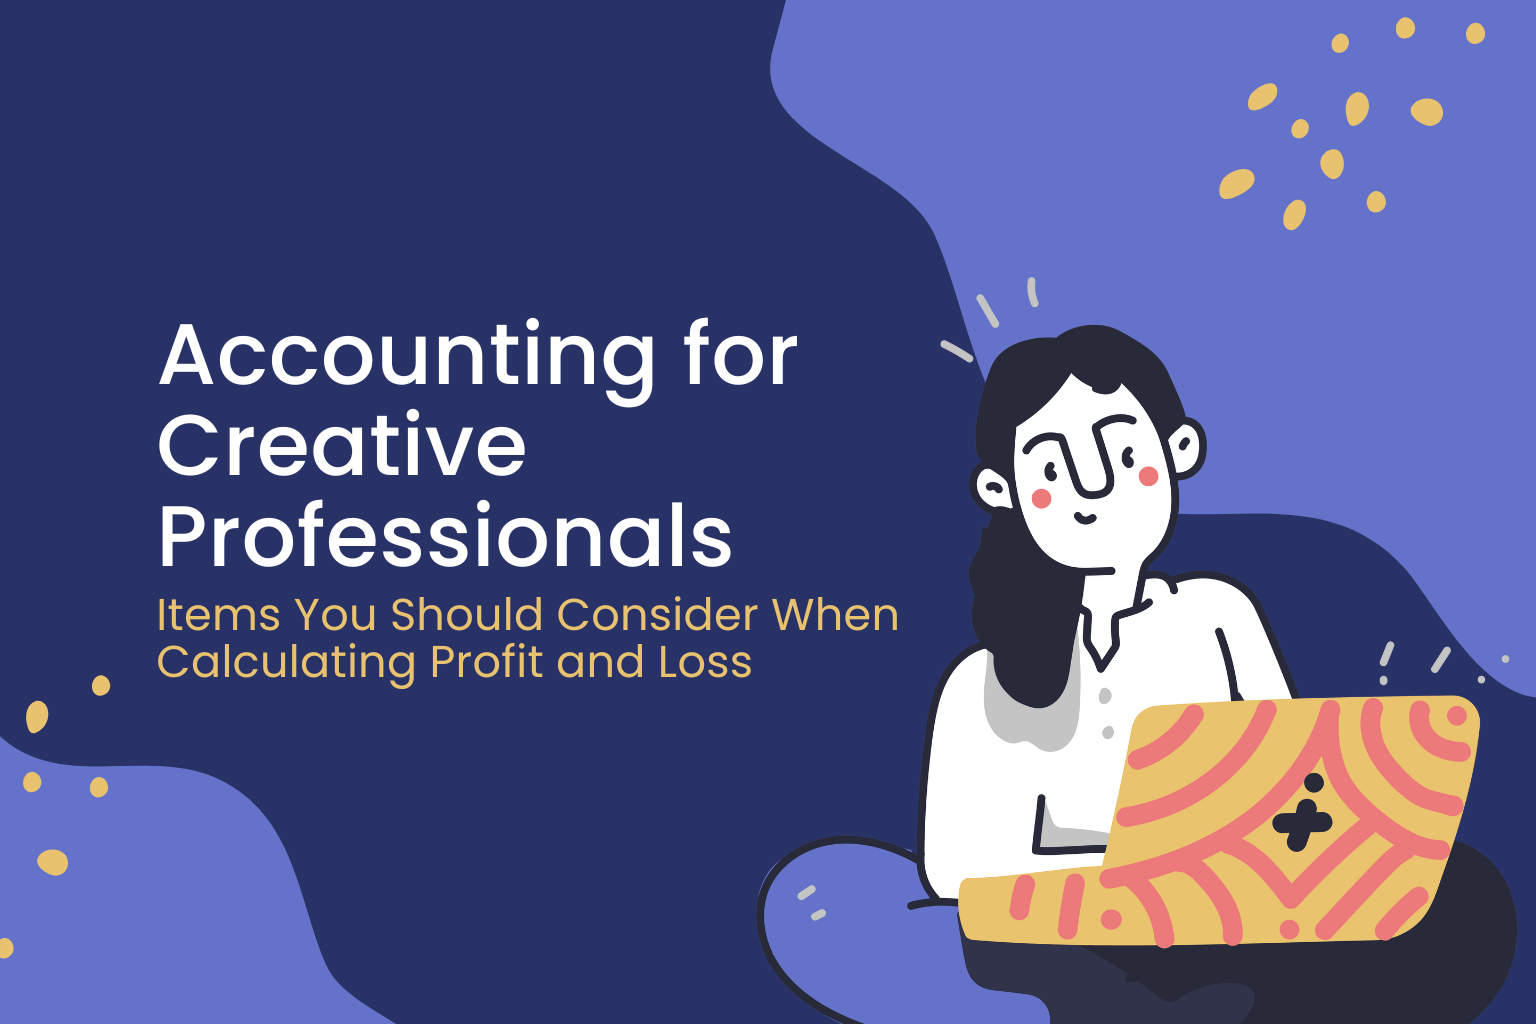 Accounting for Creative Professionals – Items You Should Consider When Calculating Profit and Loss